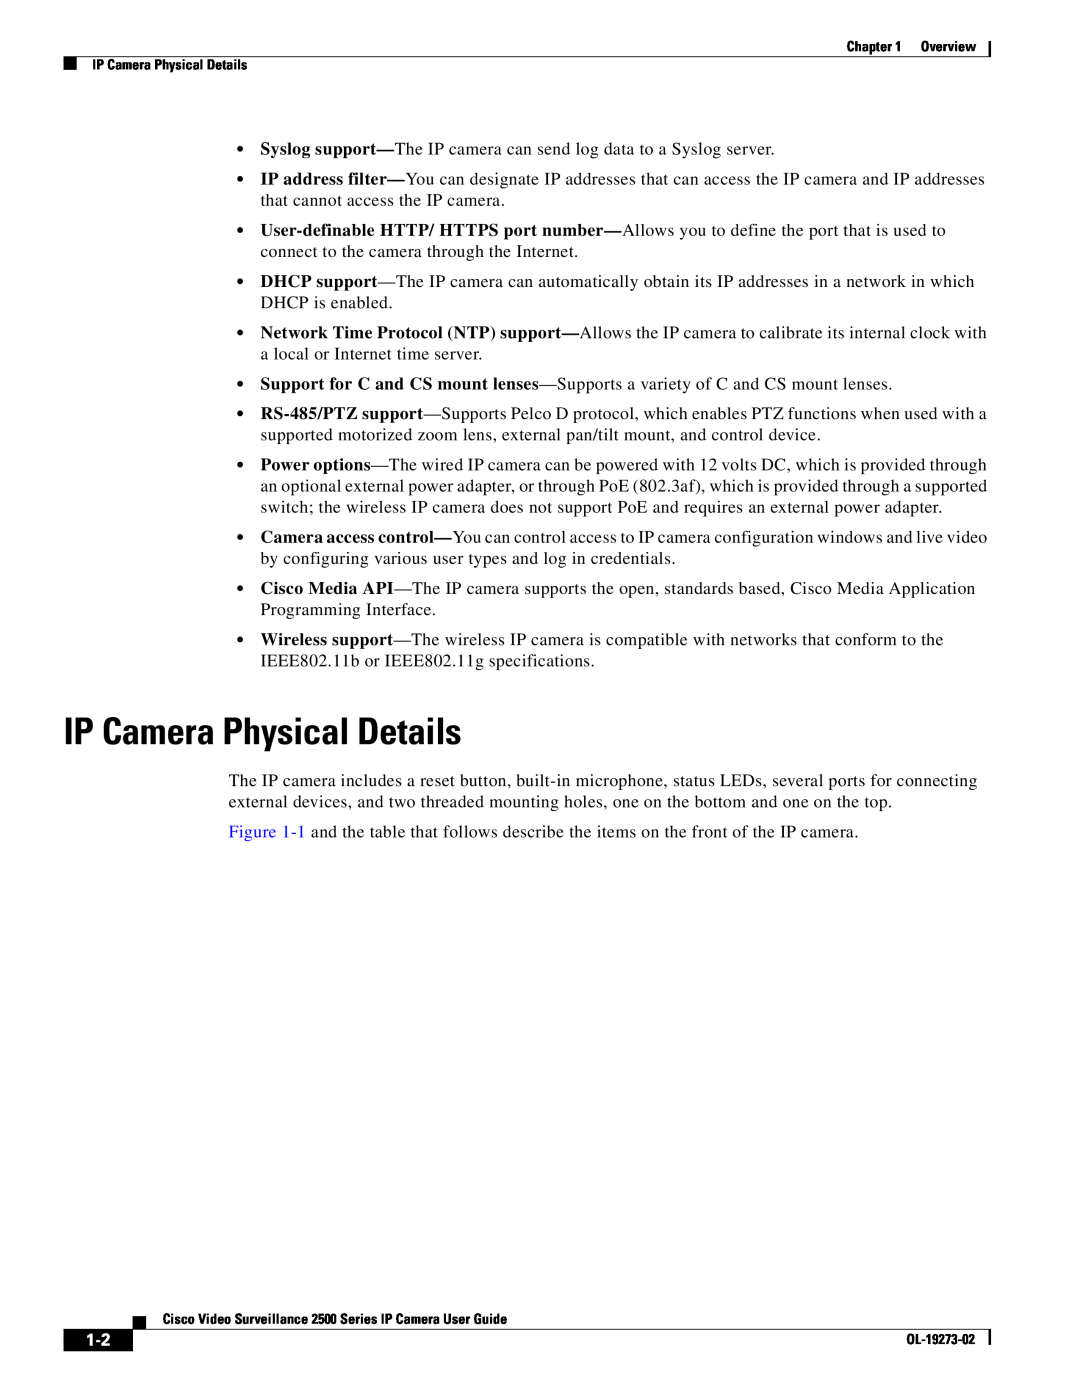 Cisco Systems 2500 Series, CIVS-IPC-2500 manual IP Camera Physical Details 